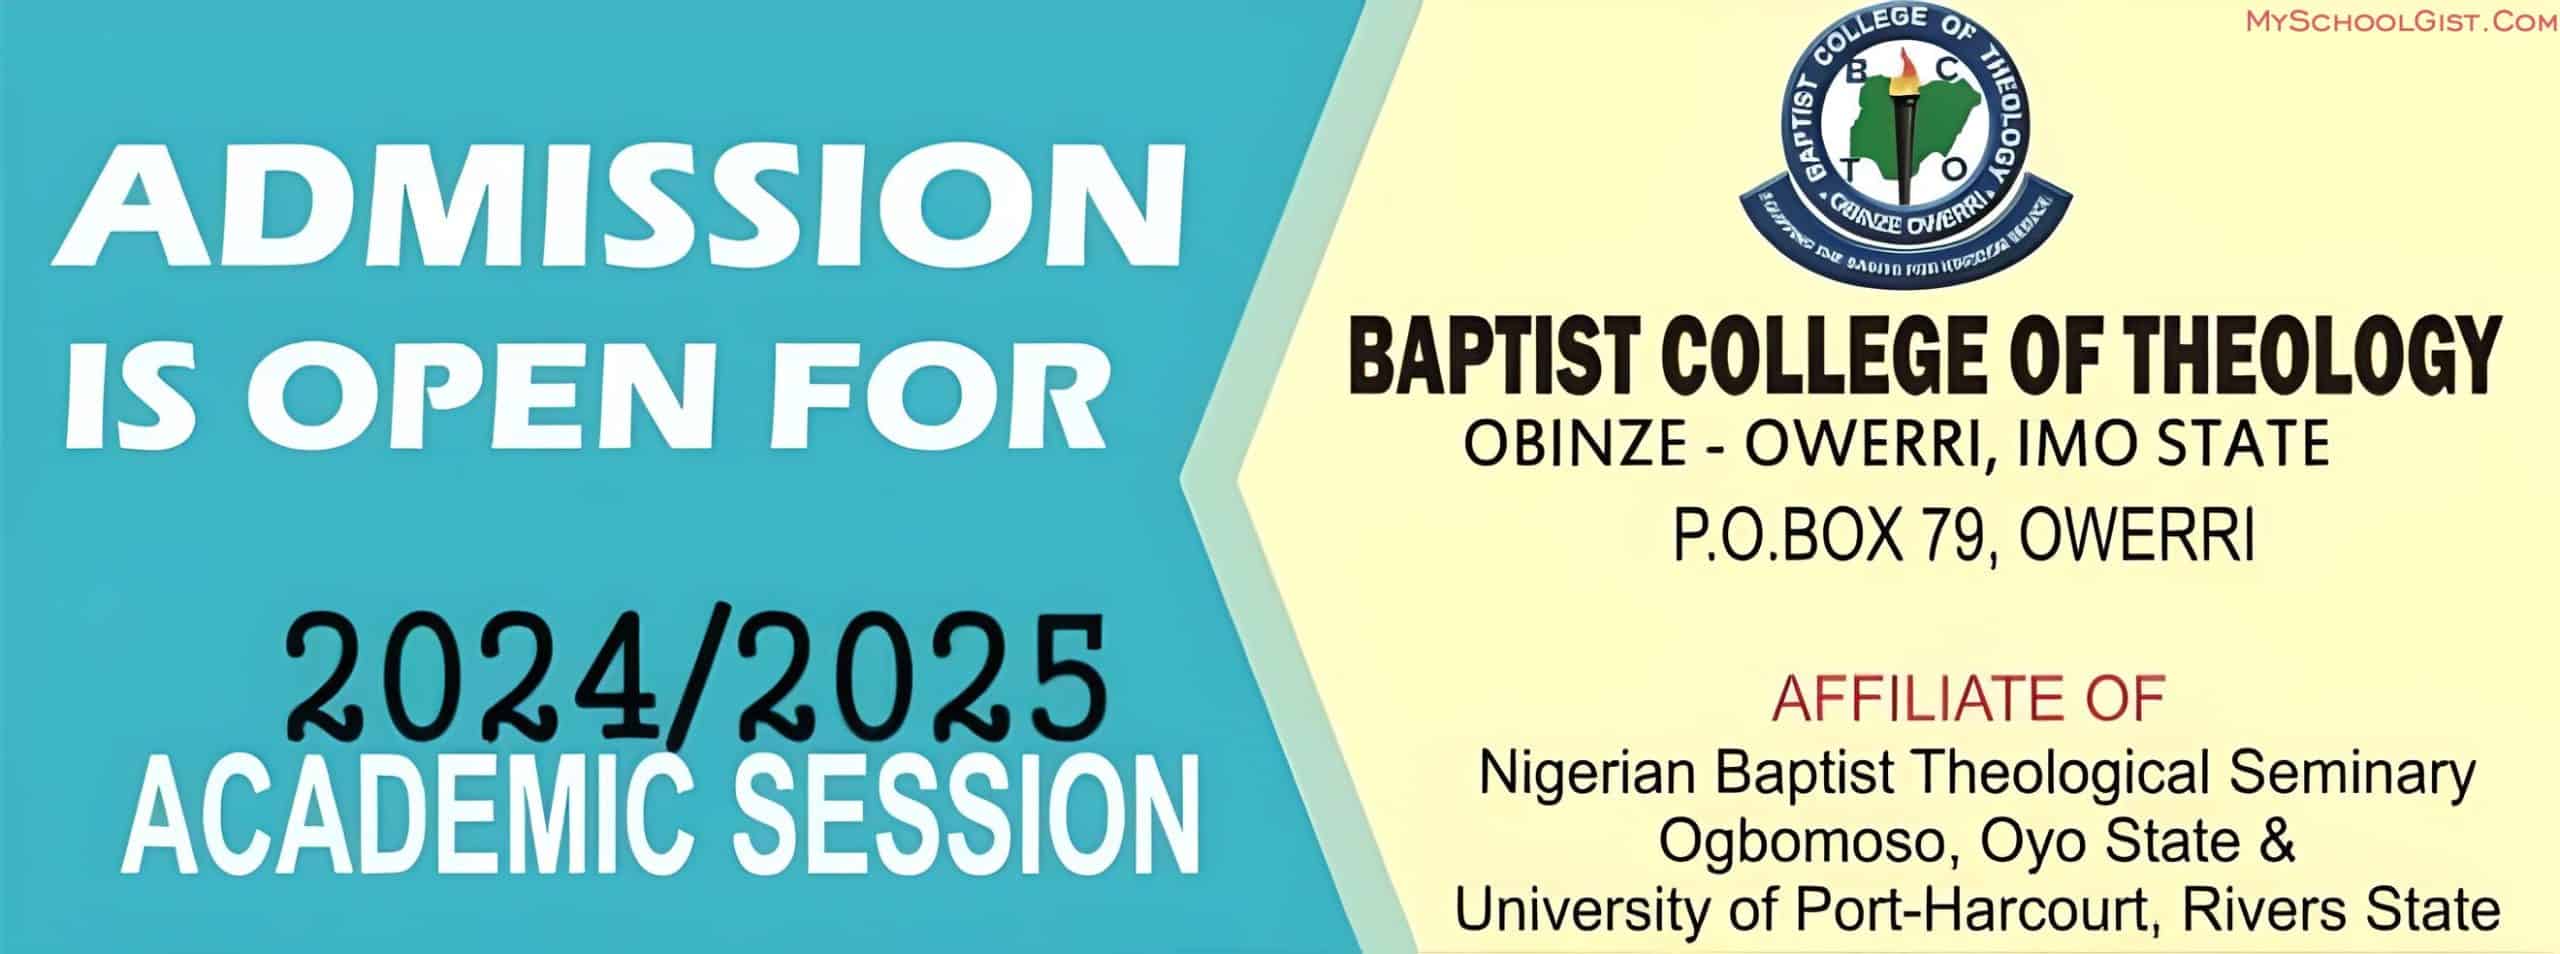 Baptist College of Theology Obinze Admission Form